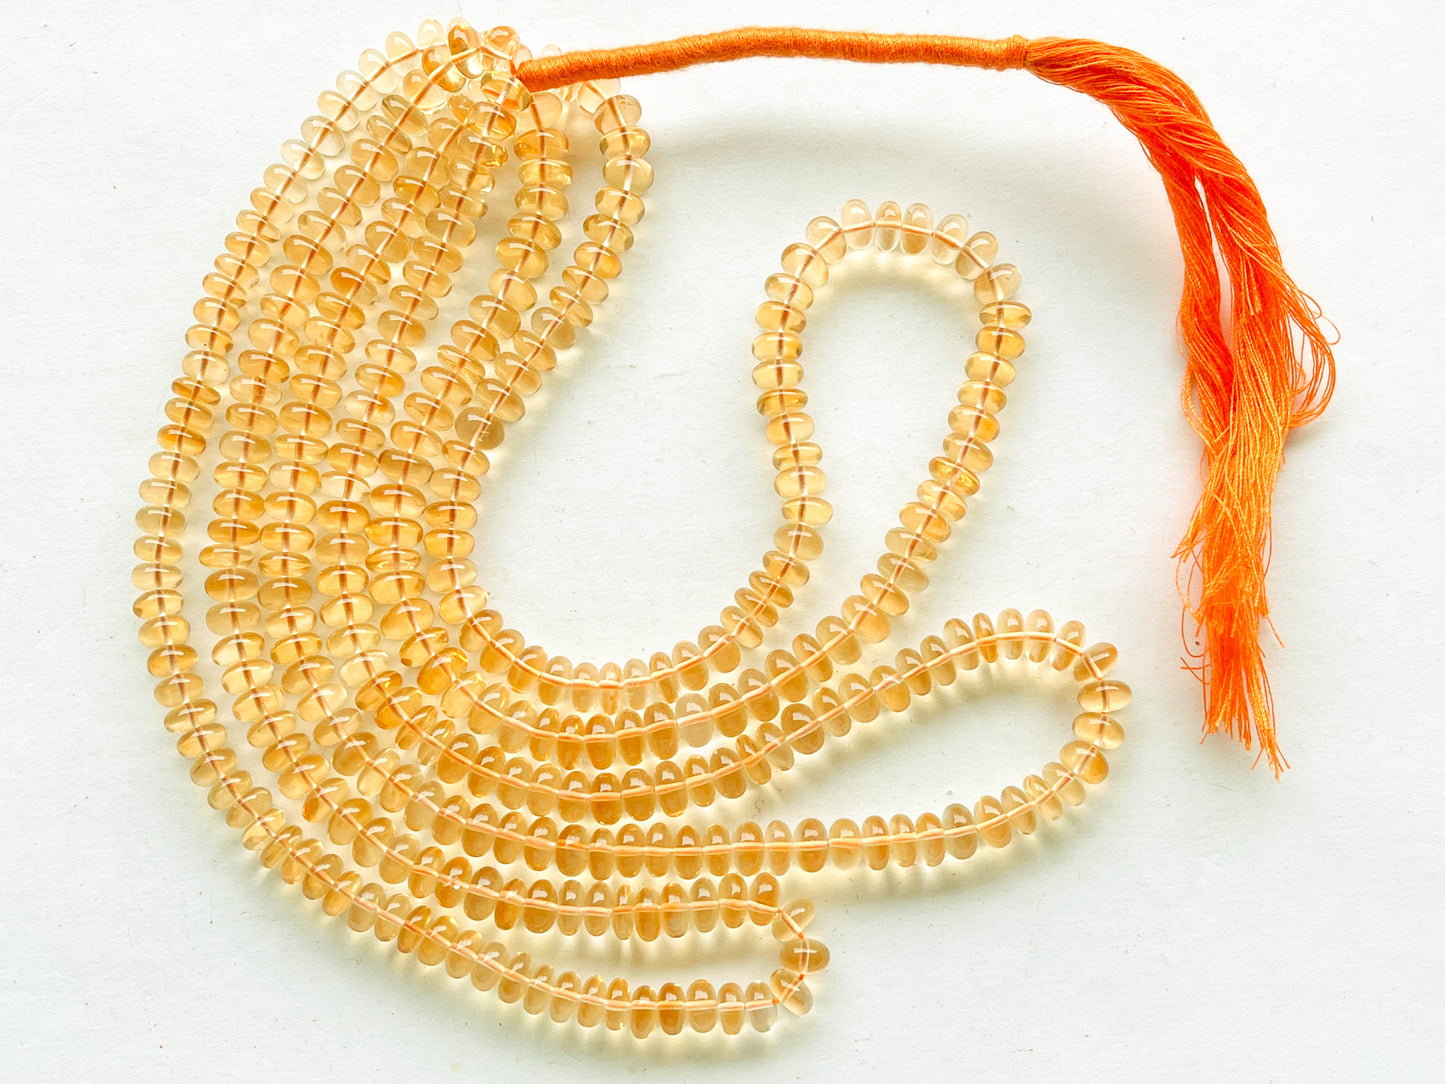 AA Citrine Smooth Rondelle Beads, 16 Inch | 7MM Beadsforyourjewelry